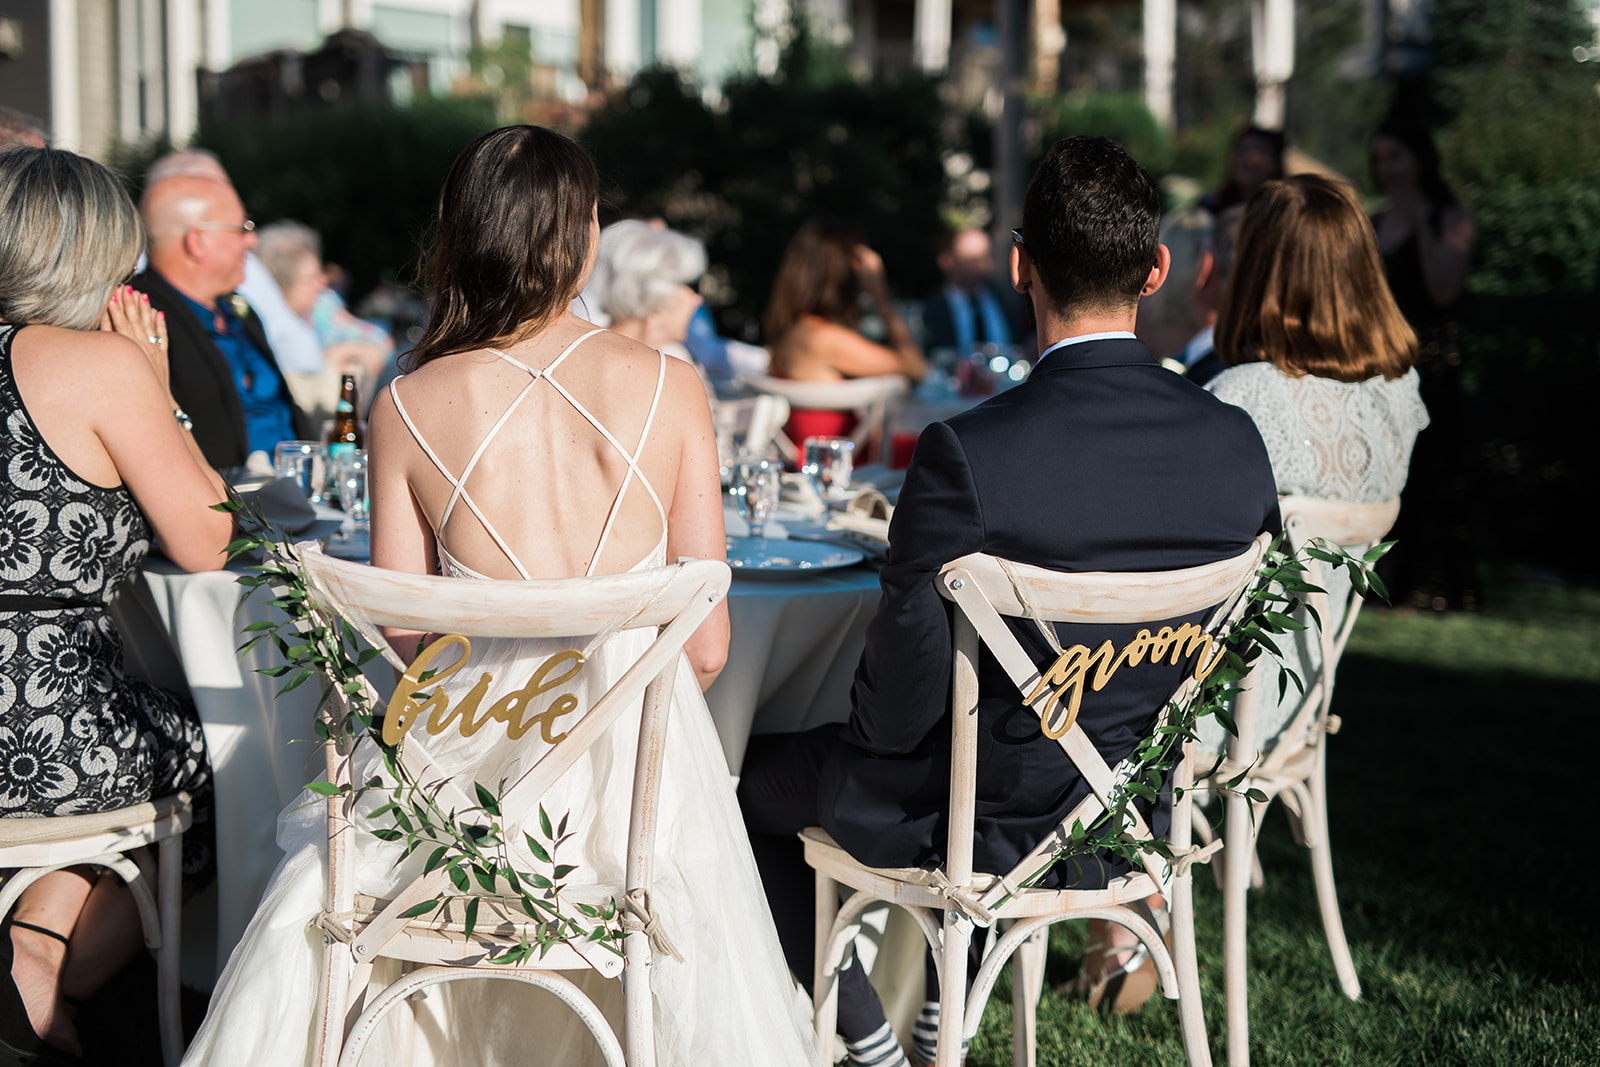 detail of bride and groom's chairs at wedding reception